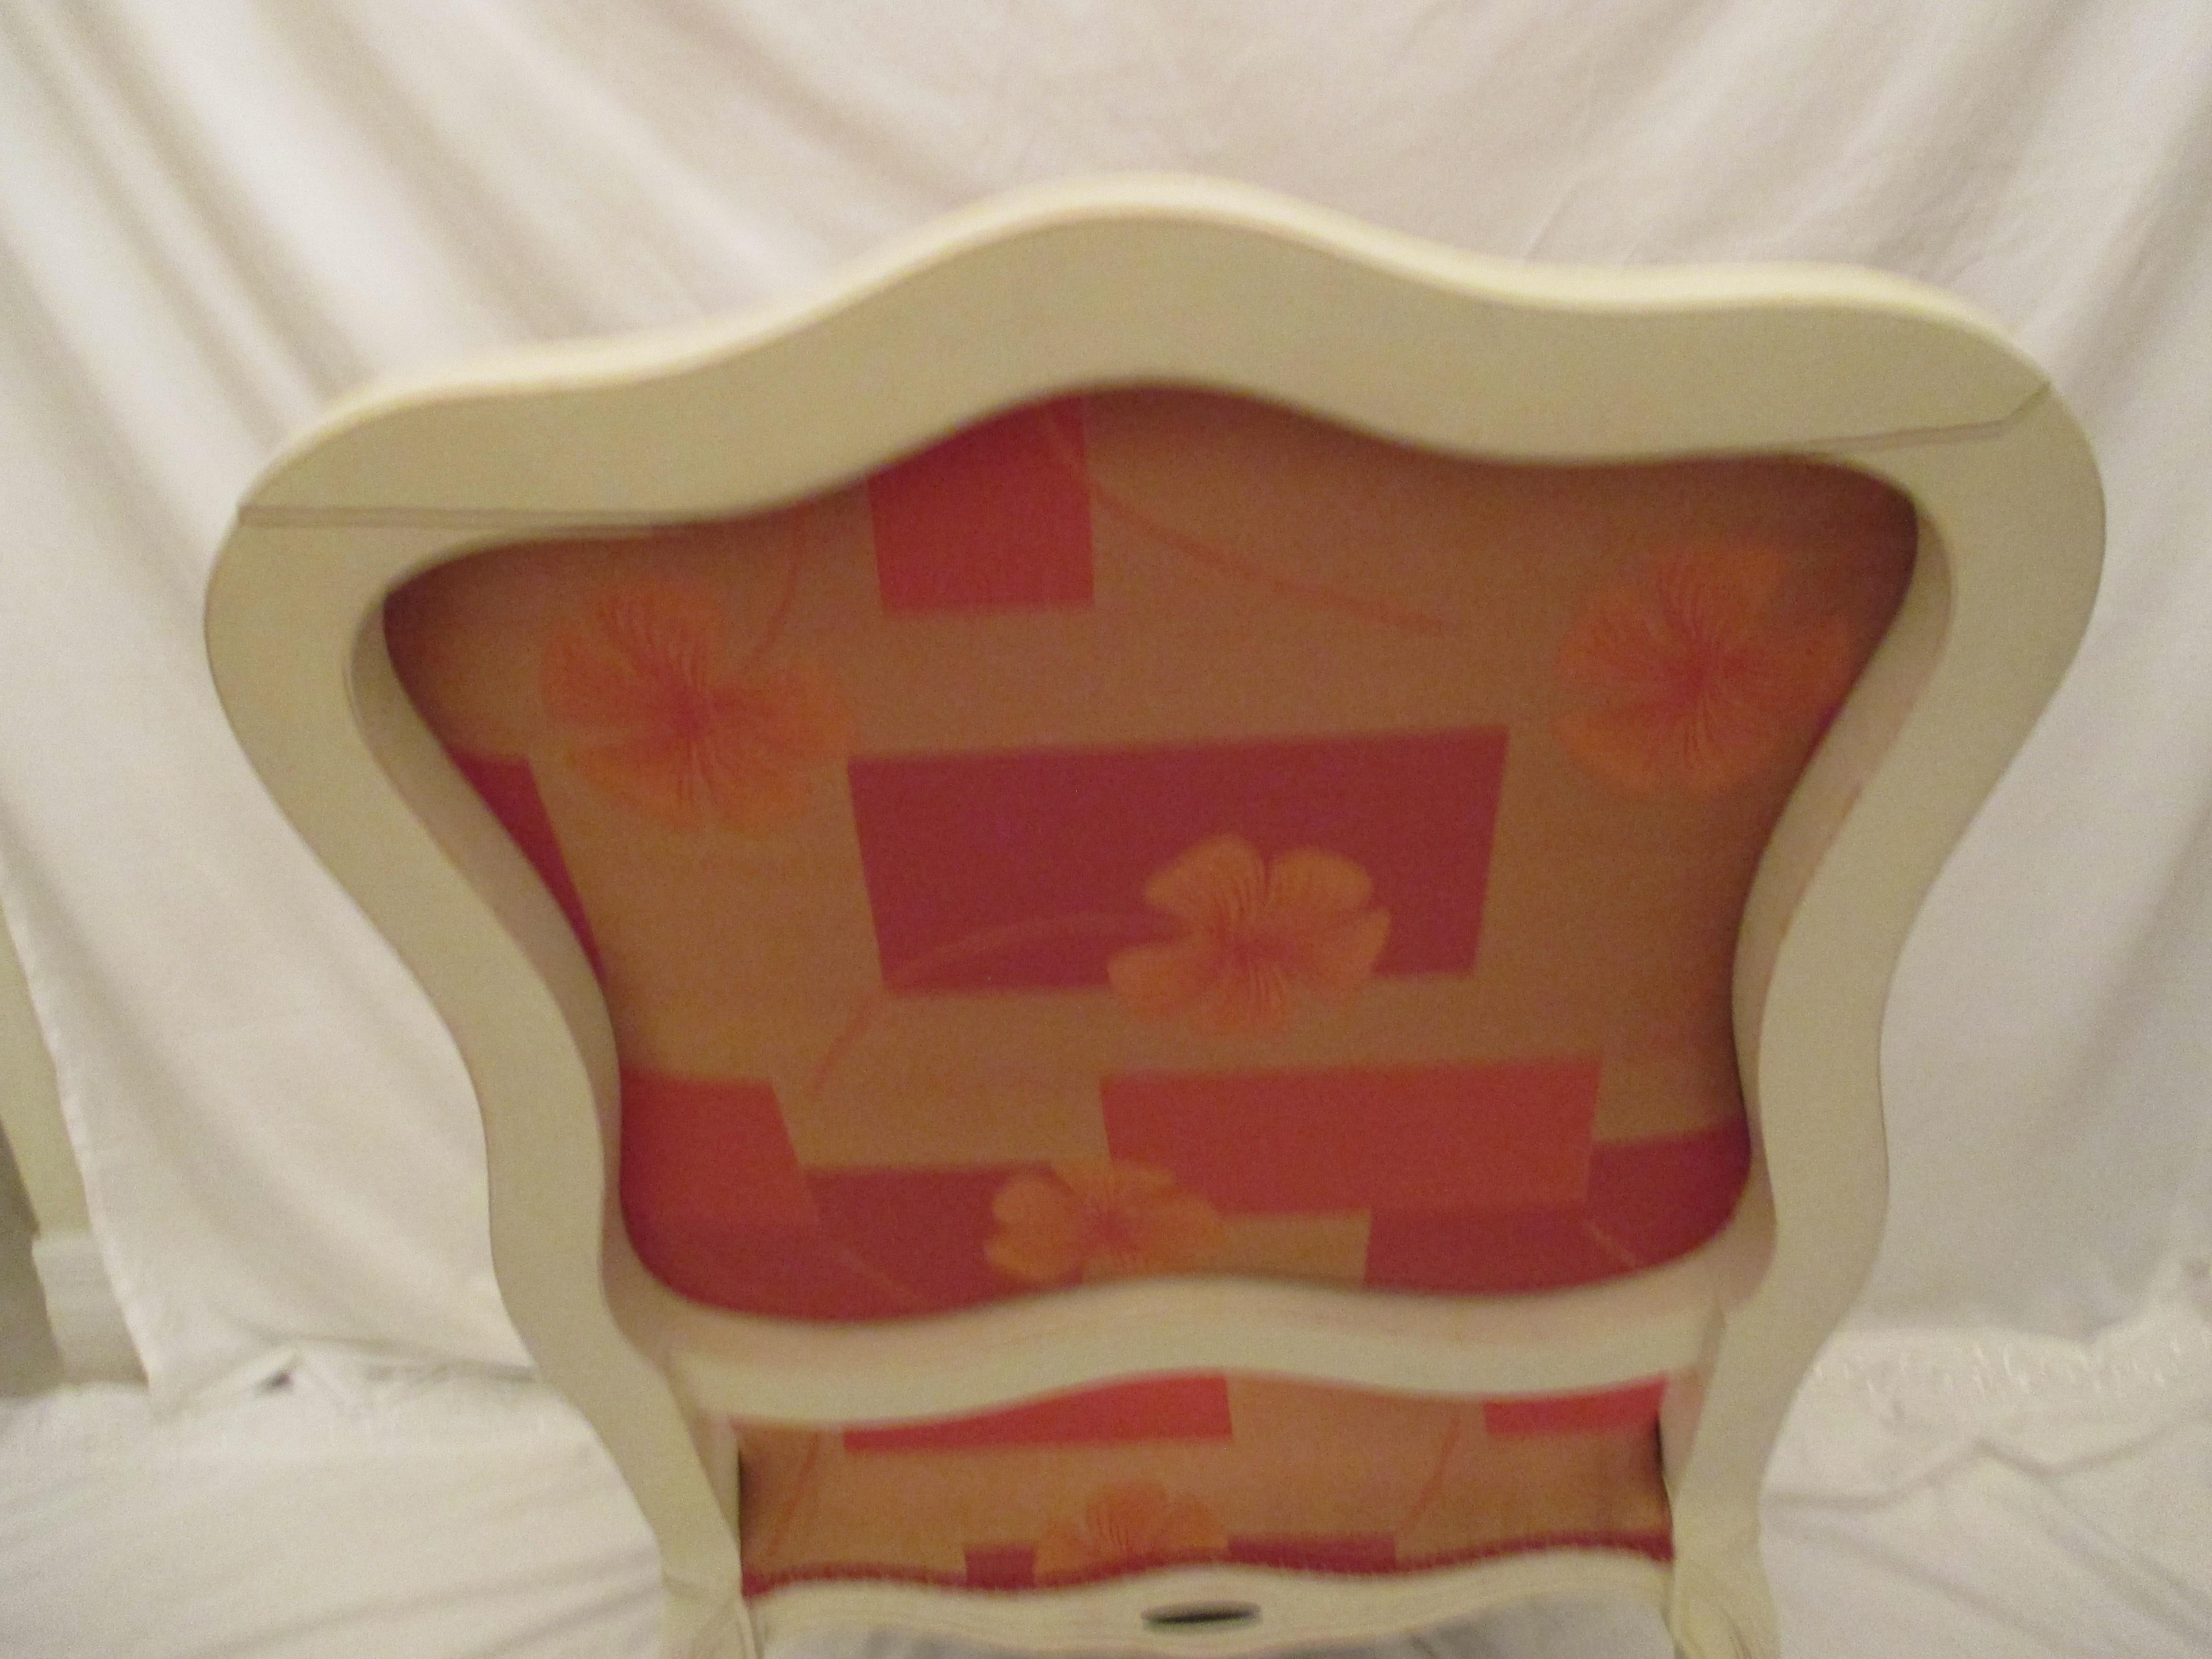 Bergere chair made in Italy with original orange floral upholstery in good condition. Chair has crack in top of the back of the chair.